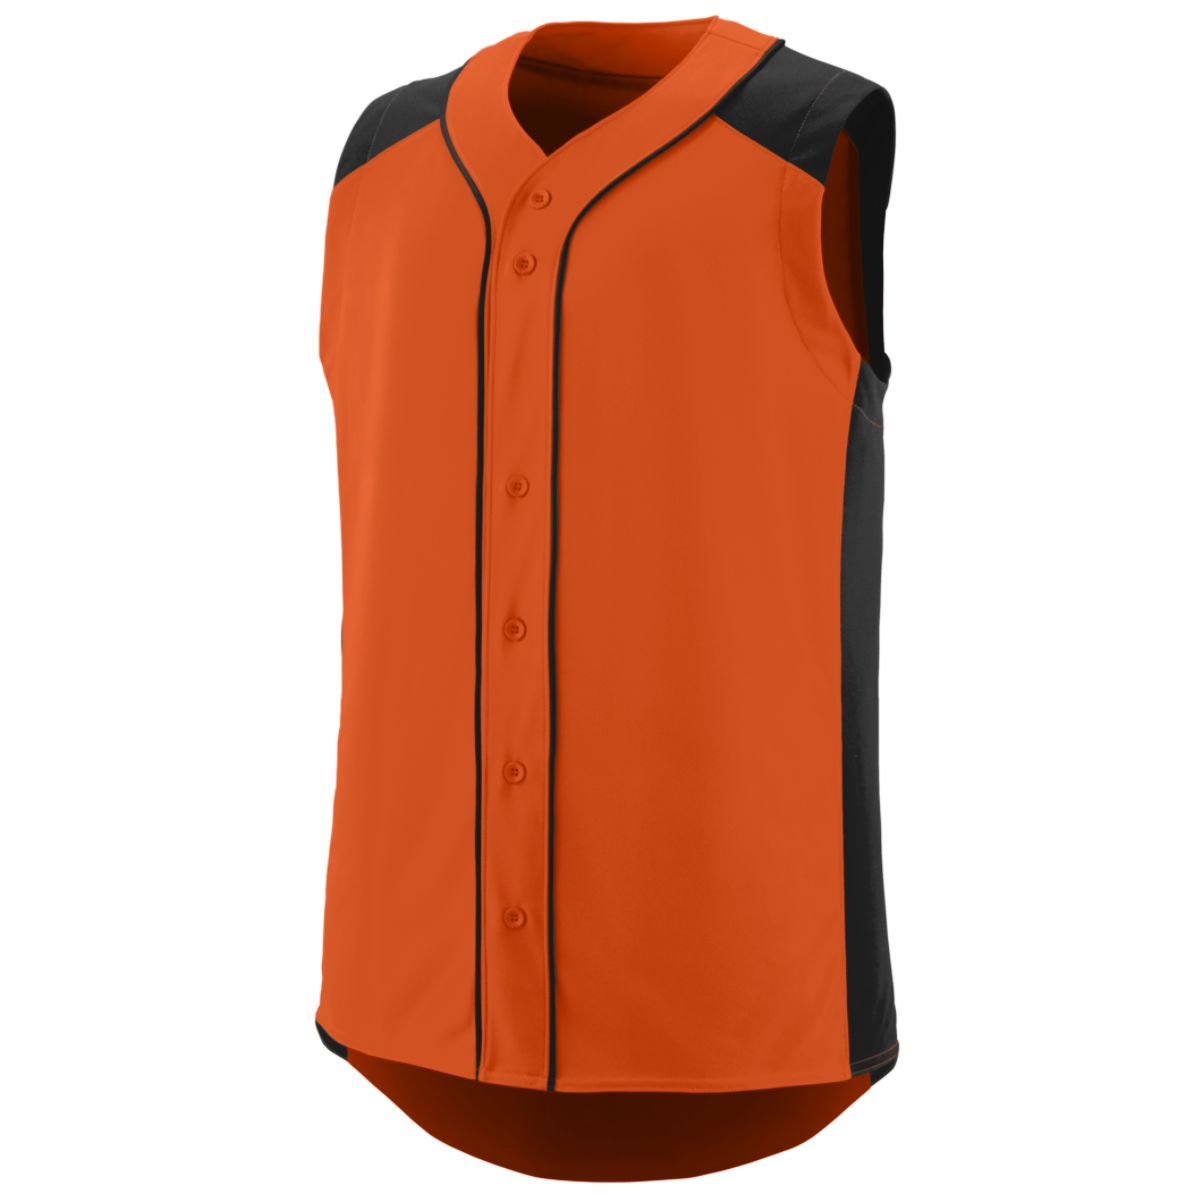 Augusta Sportswear Sleeveless Slugger Jersey in Orange/Black  -Part of the Adult, Adult-Jersey, Augusta-Products, Baseball, Shirts, All-Sports, All-Sports-1 product lines at KanaleyCreations.com